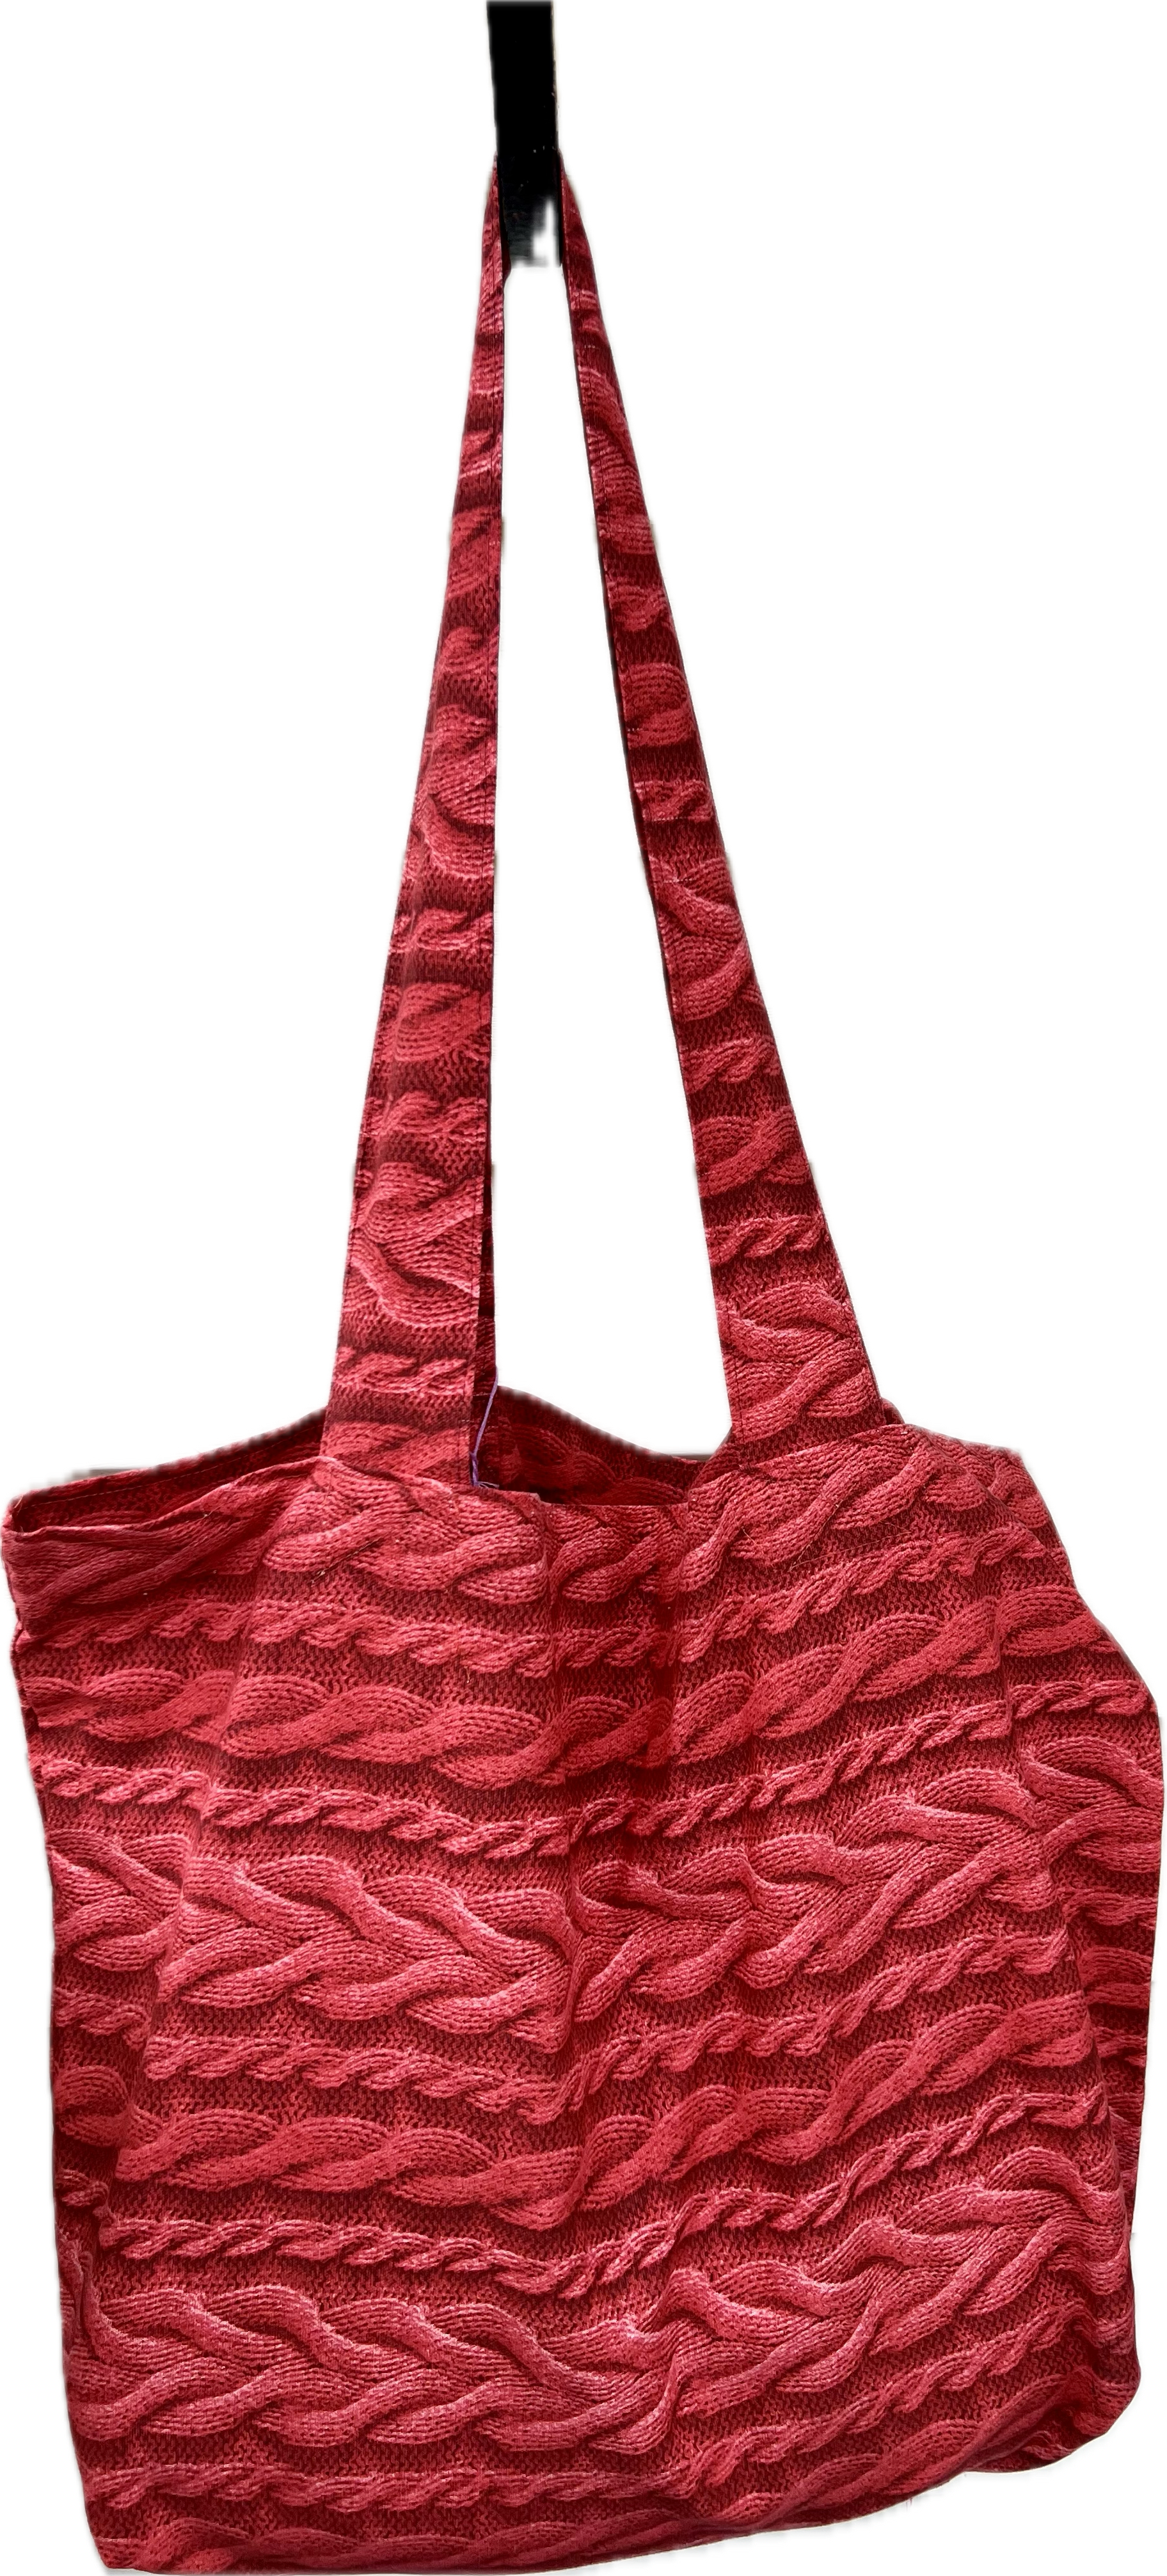 Market Grocery Tote Bag Knit Cable in Rust